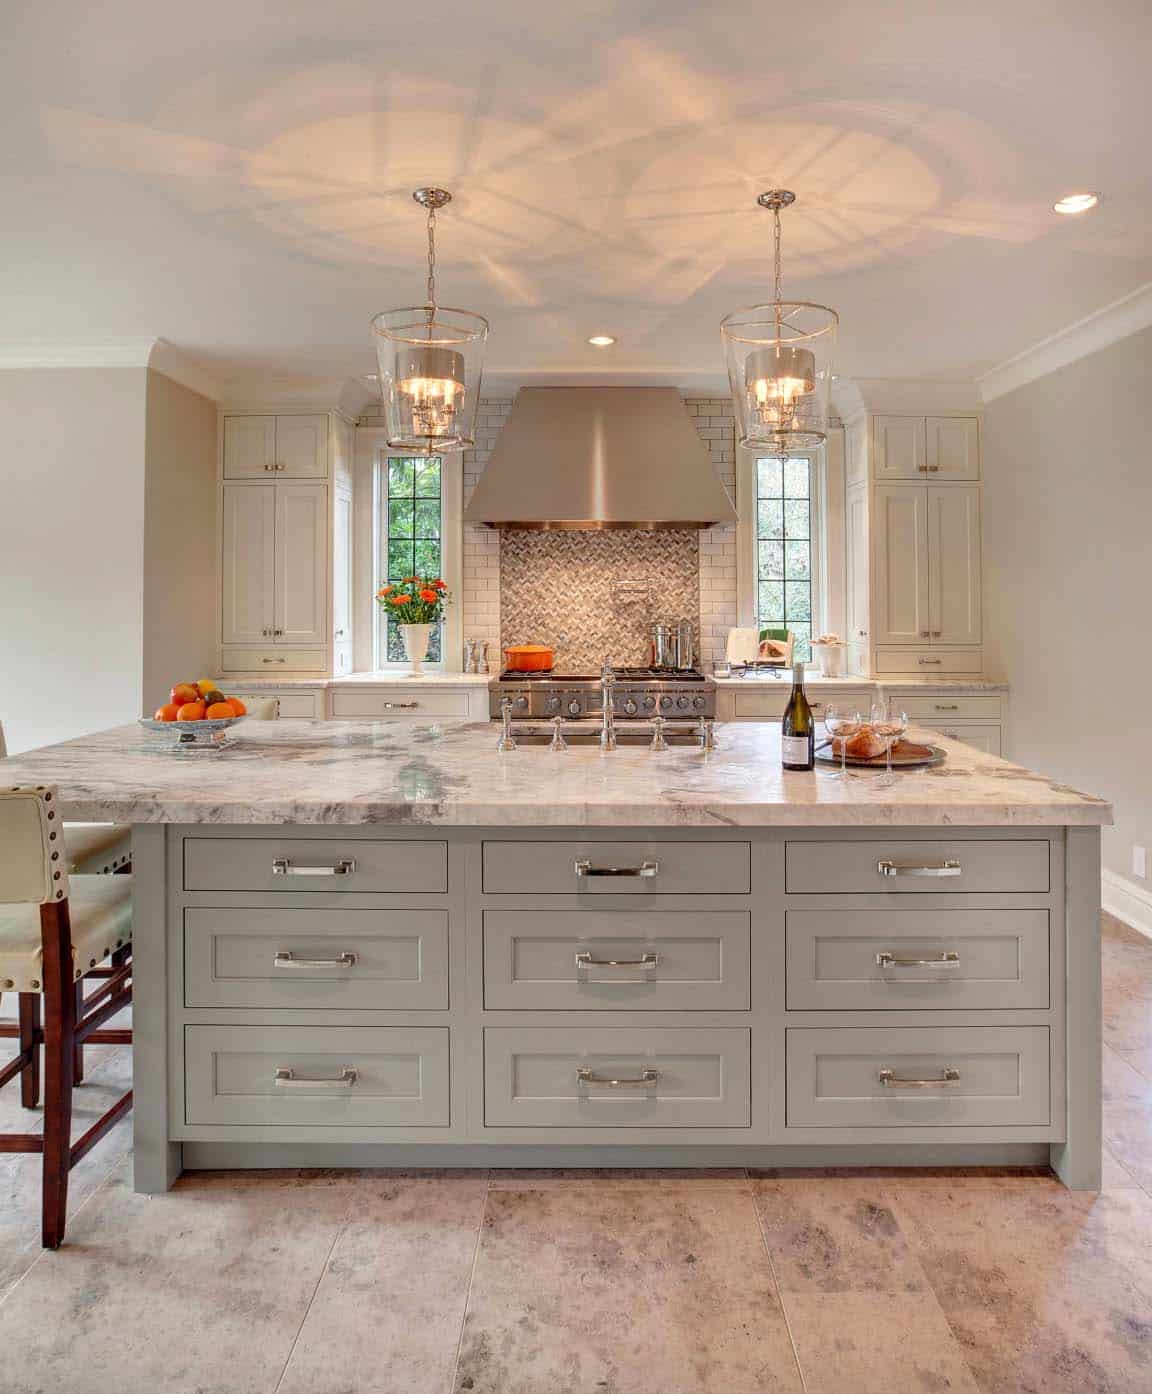 18+ Absolutely Gorgeous Transitional Style Kitchen Ideas